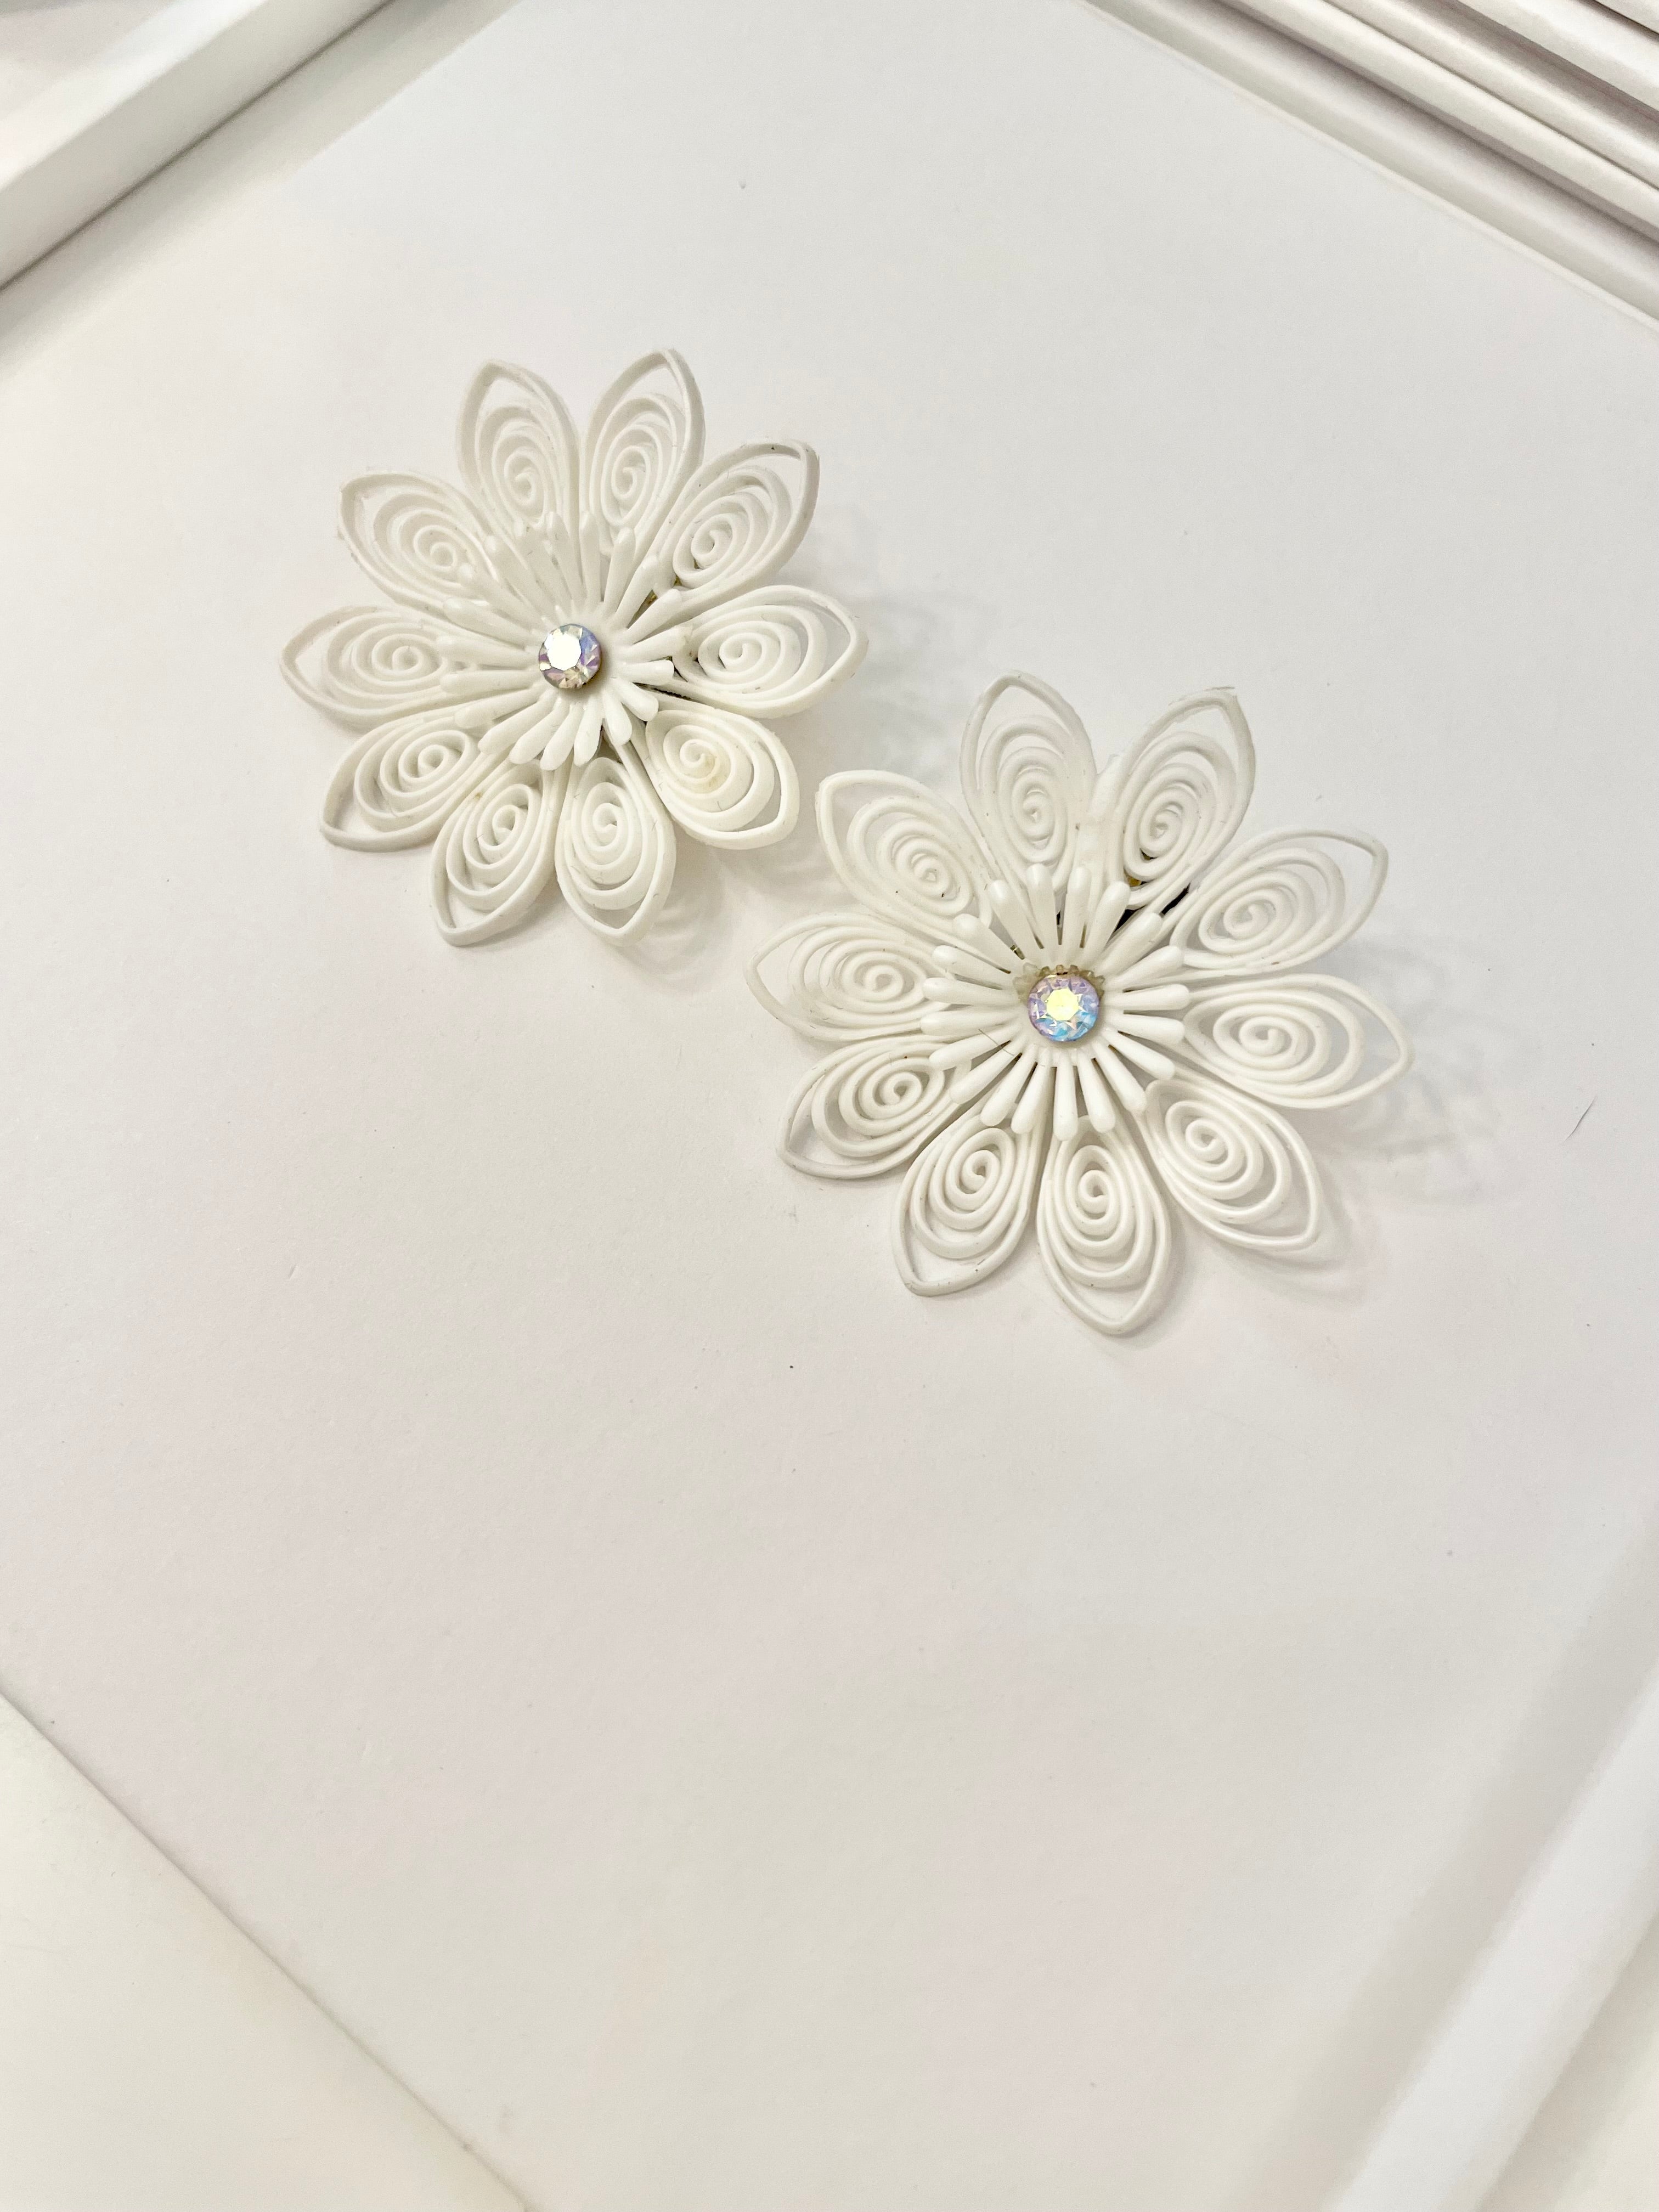 She just loves flowers... these blanc filigree resin flowers are truly divine!